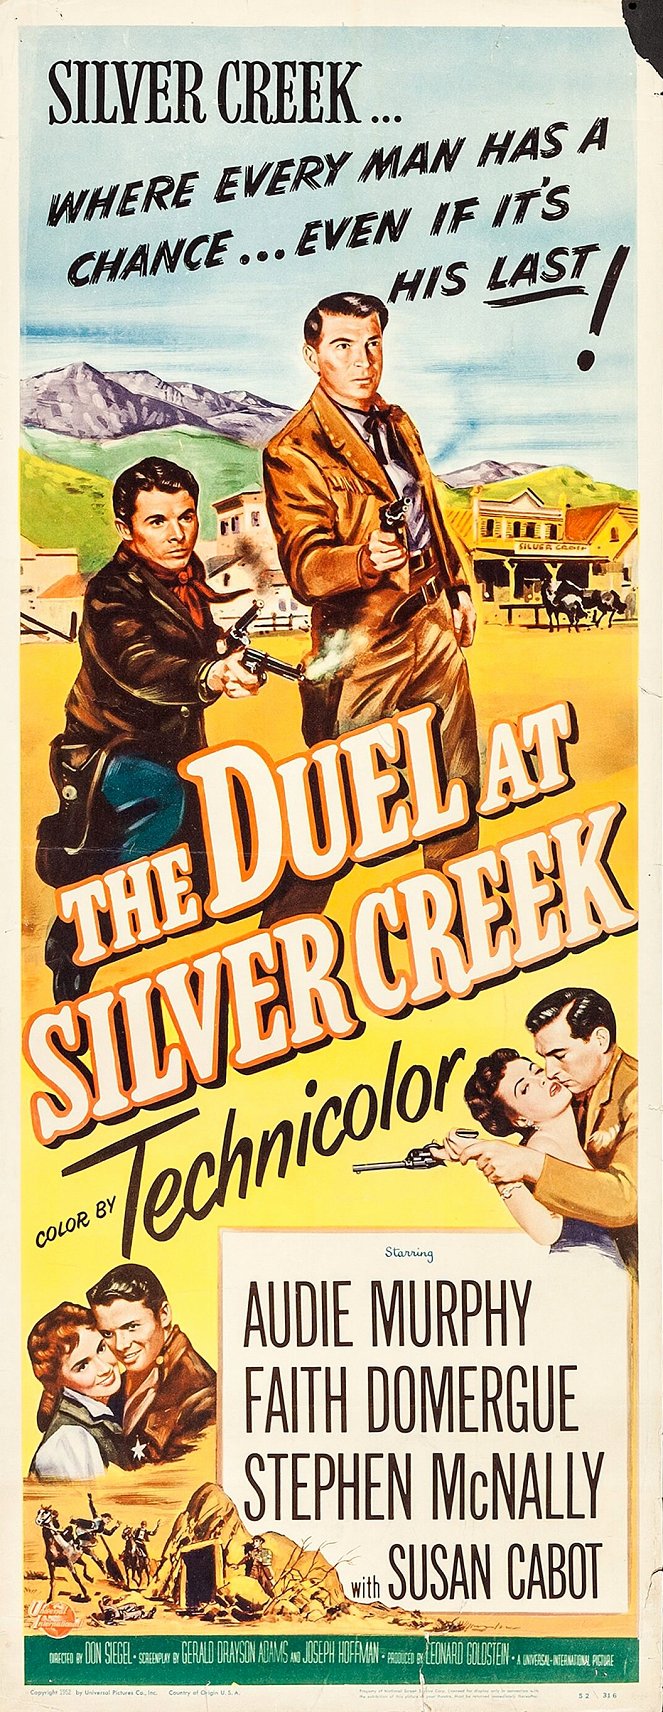 The Duel at Silver Creek - Posters